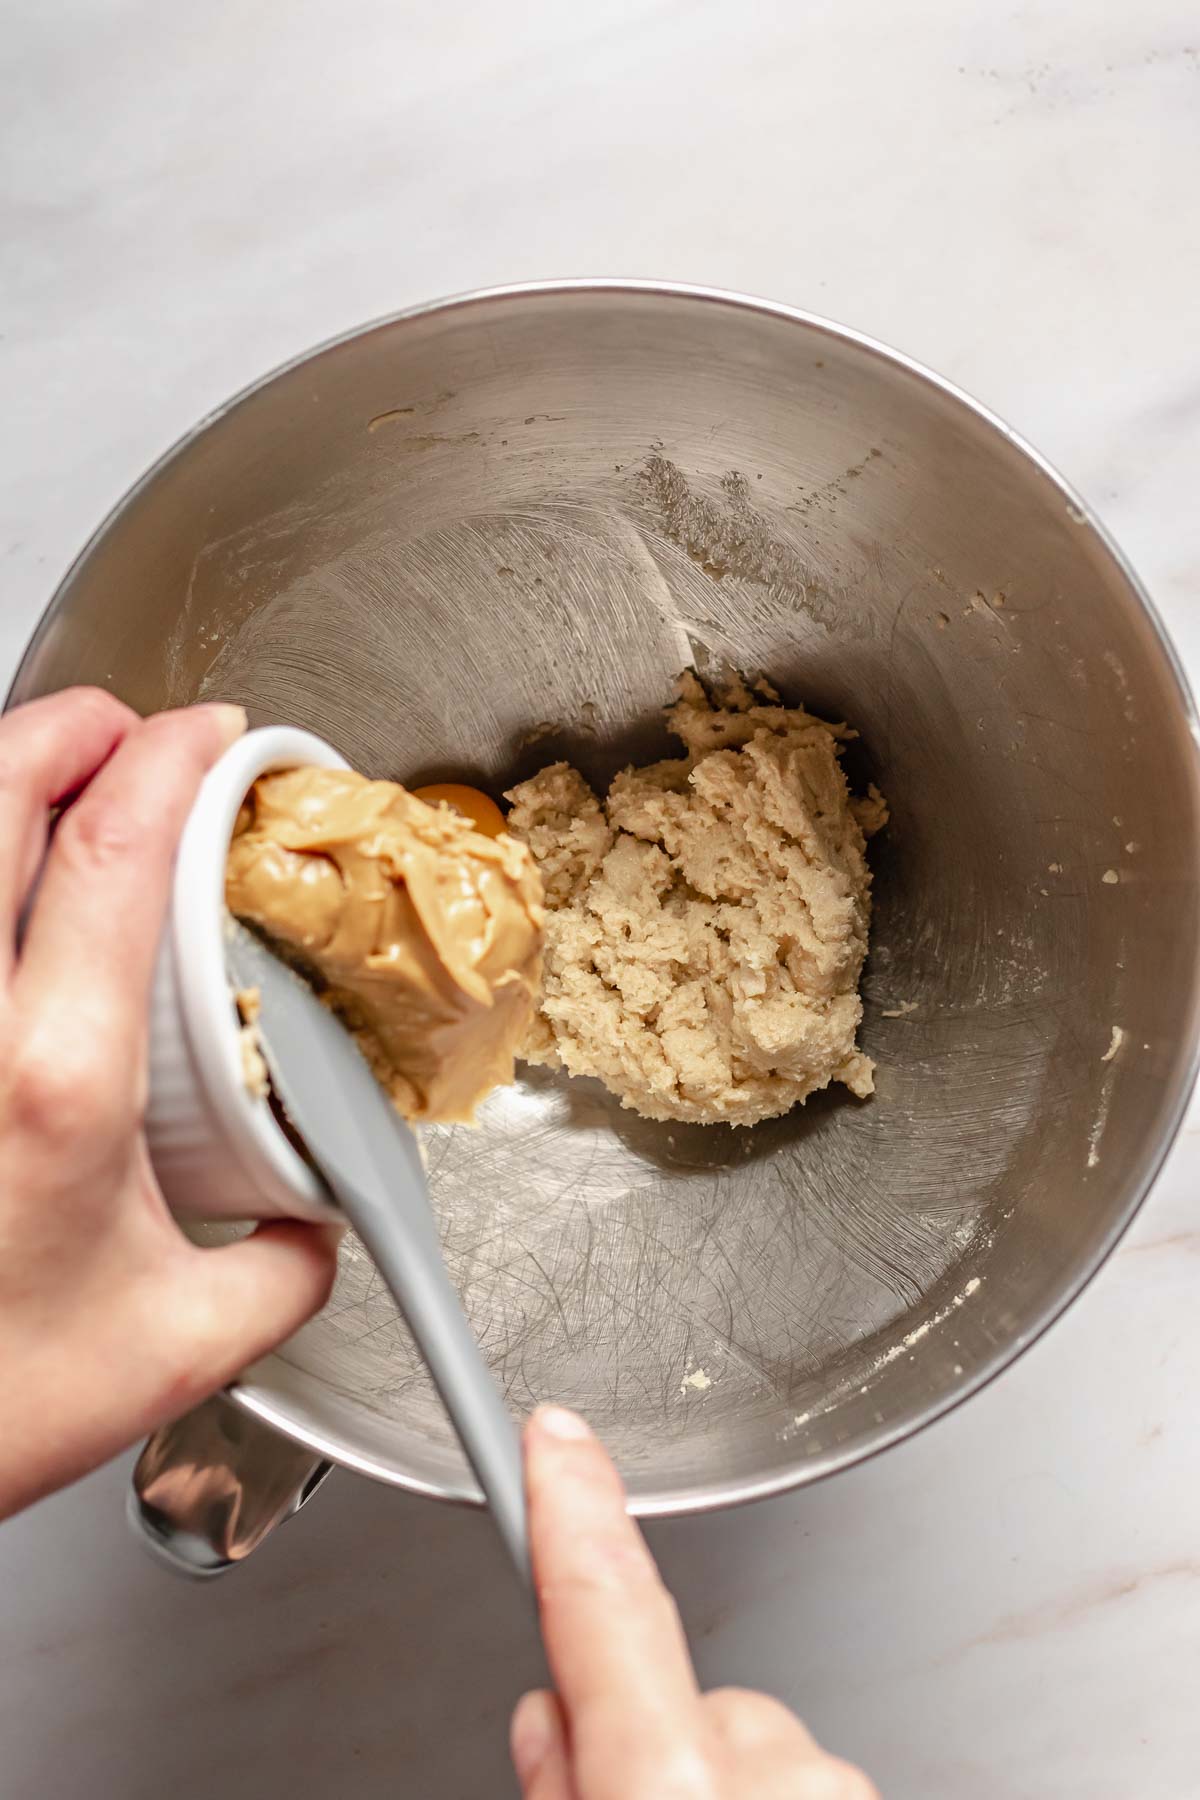 Pouring peanut butter into the creamed ingredients.